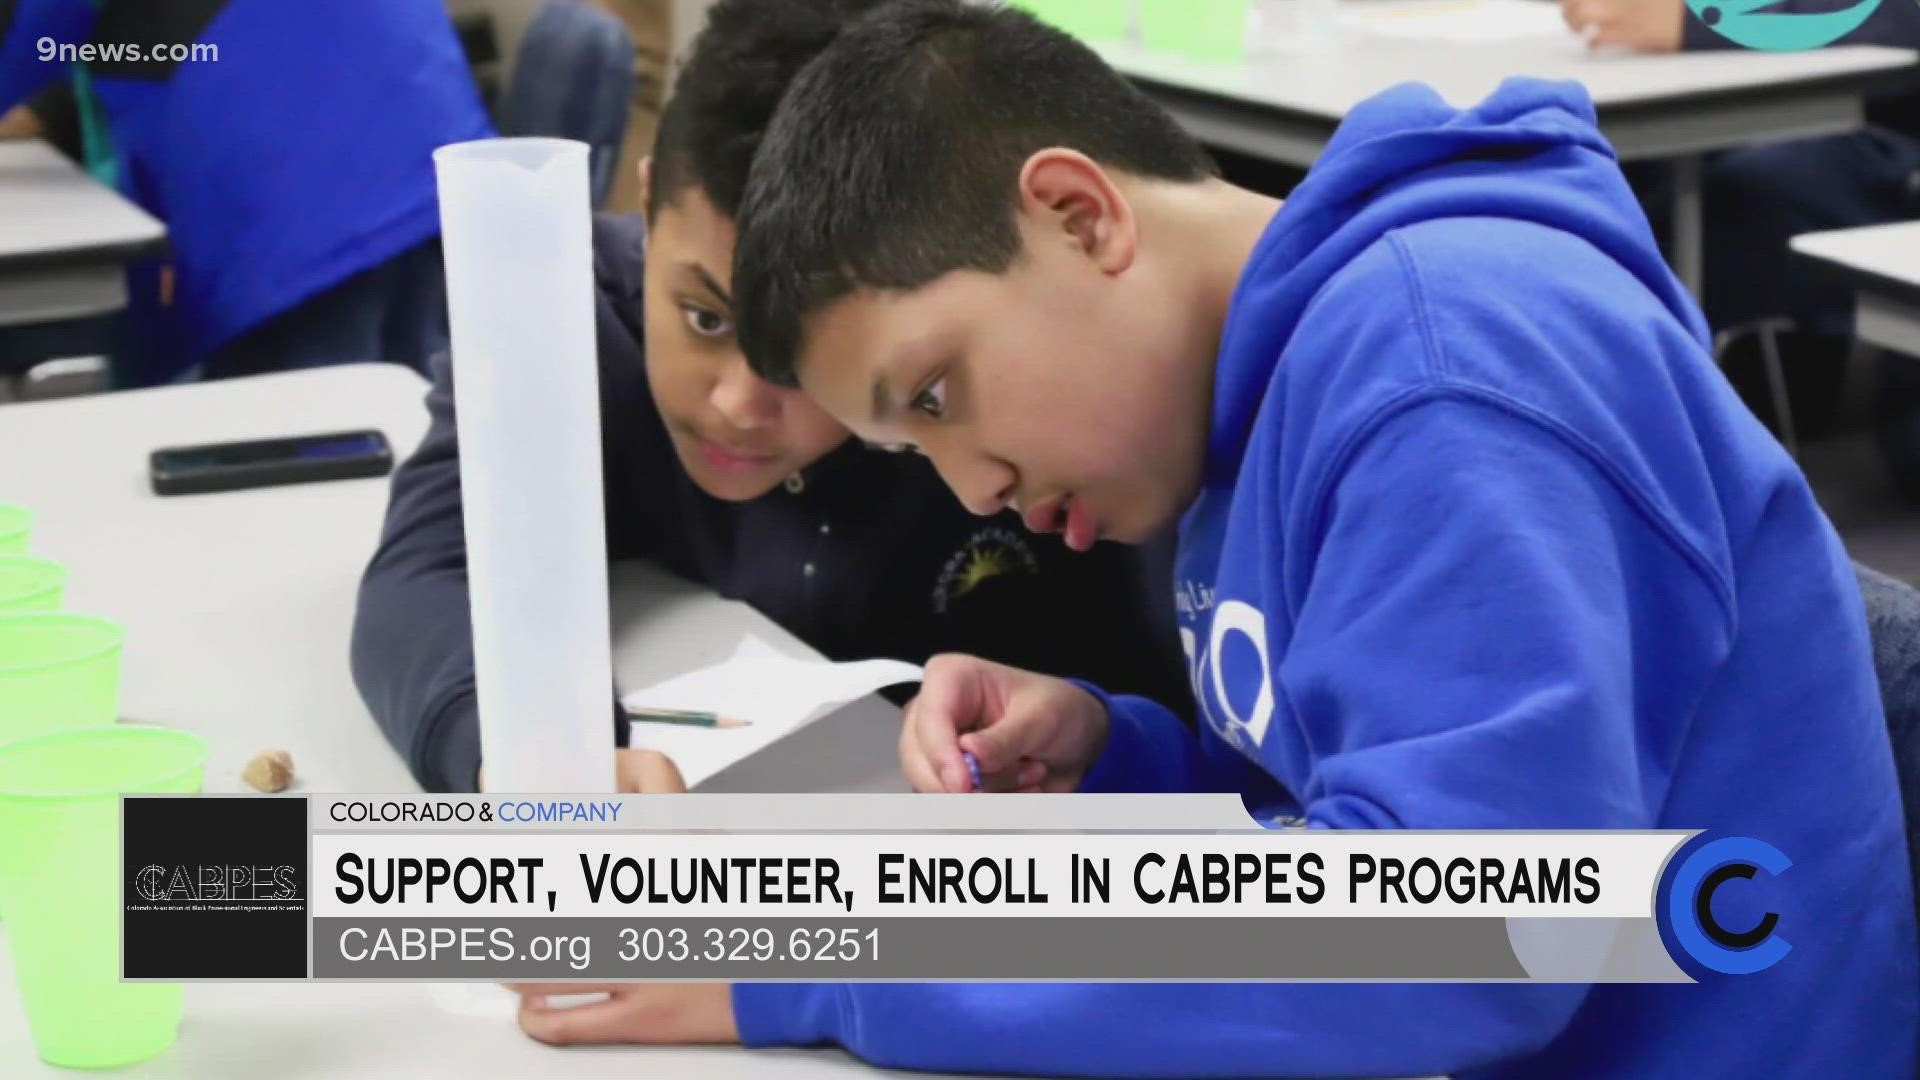 CABPES has programs for your student! Learn about the options and enroll at CABPES.org.